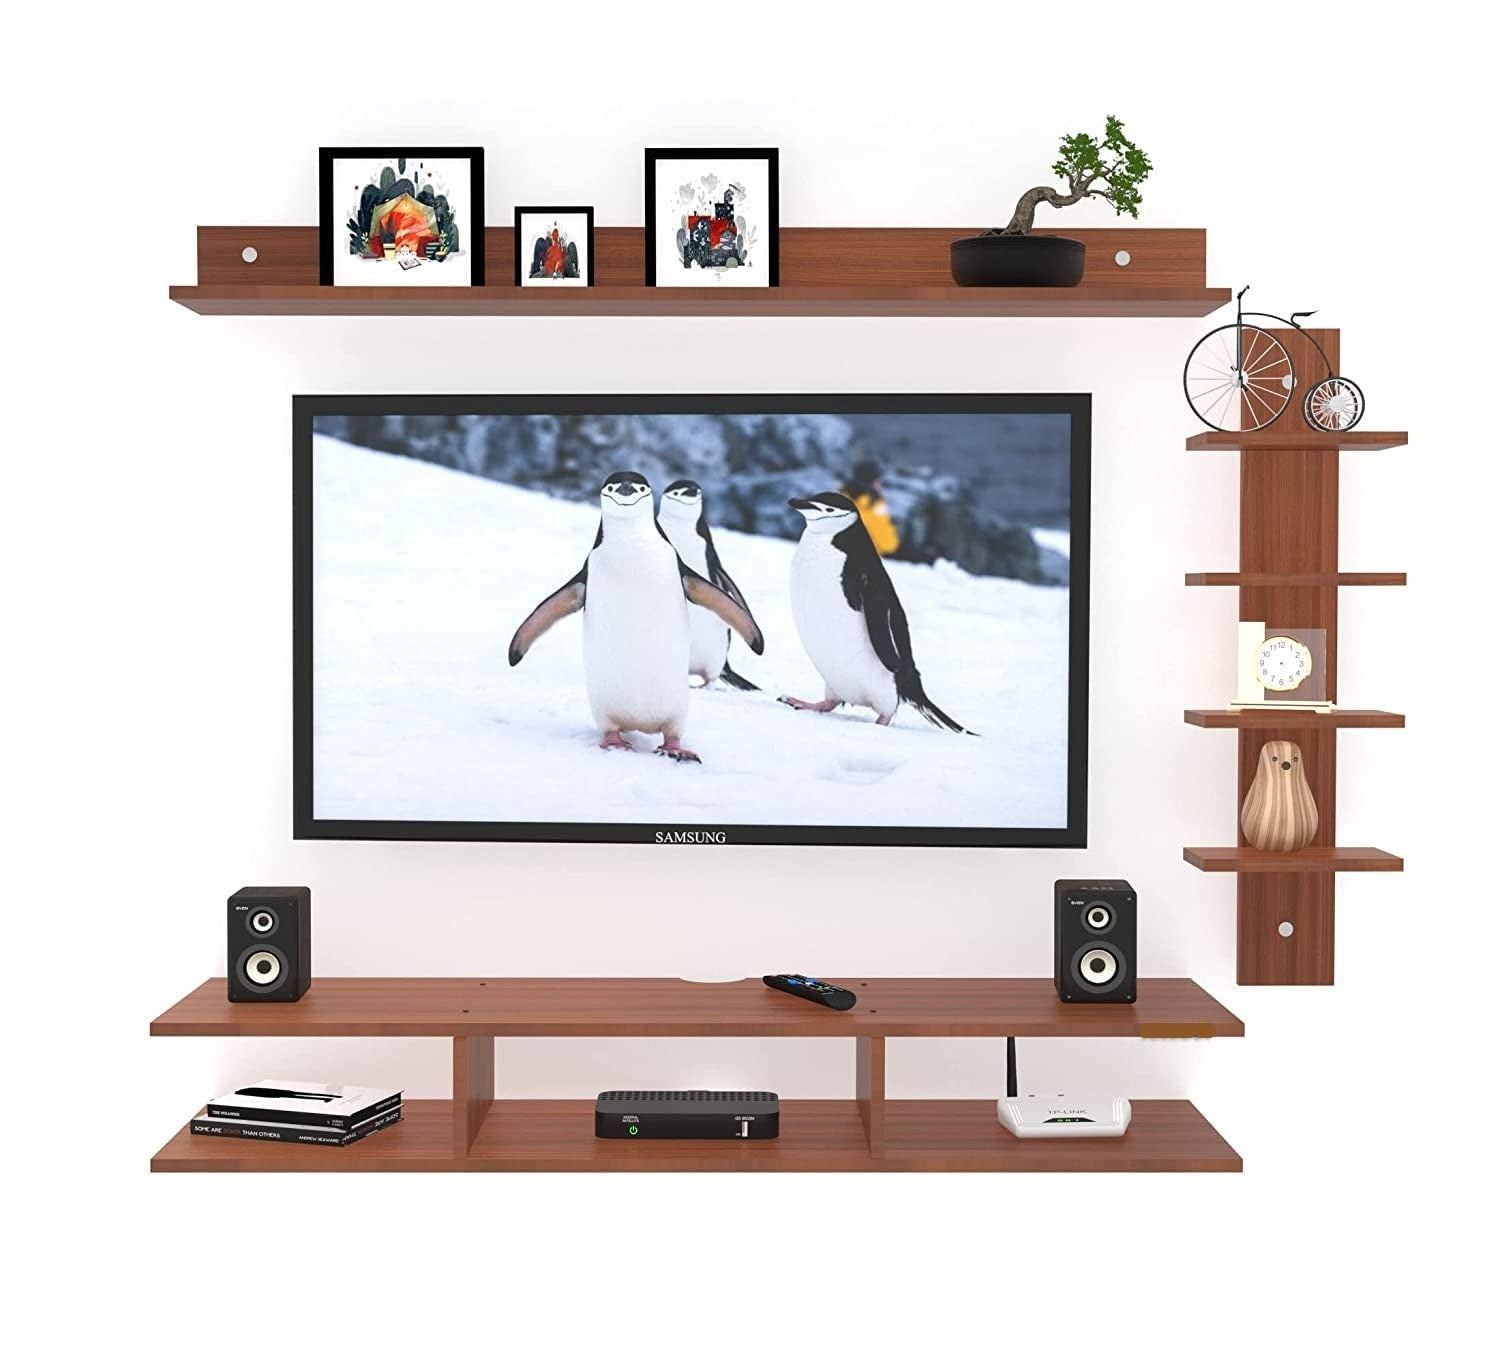 Wall Mount TV Unit: Wall Mount TV Unit With Set Top Box Stand(Walnut)